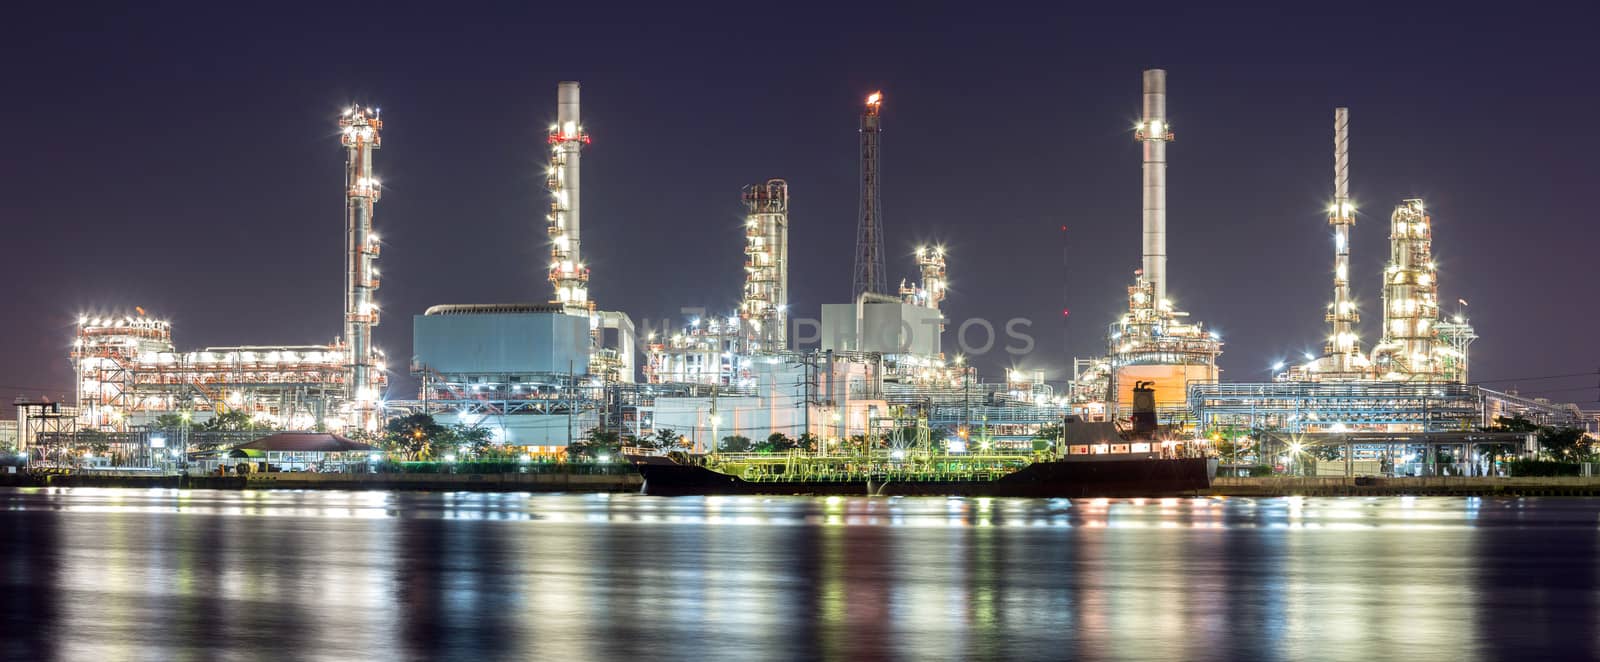 Panorama landscape of Oil refinery plant along river with tanker at night